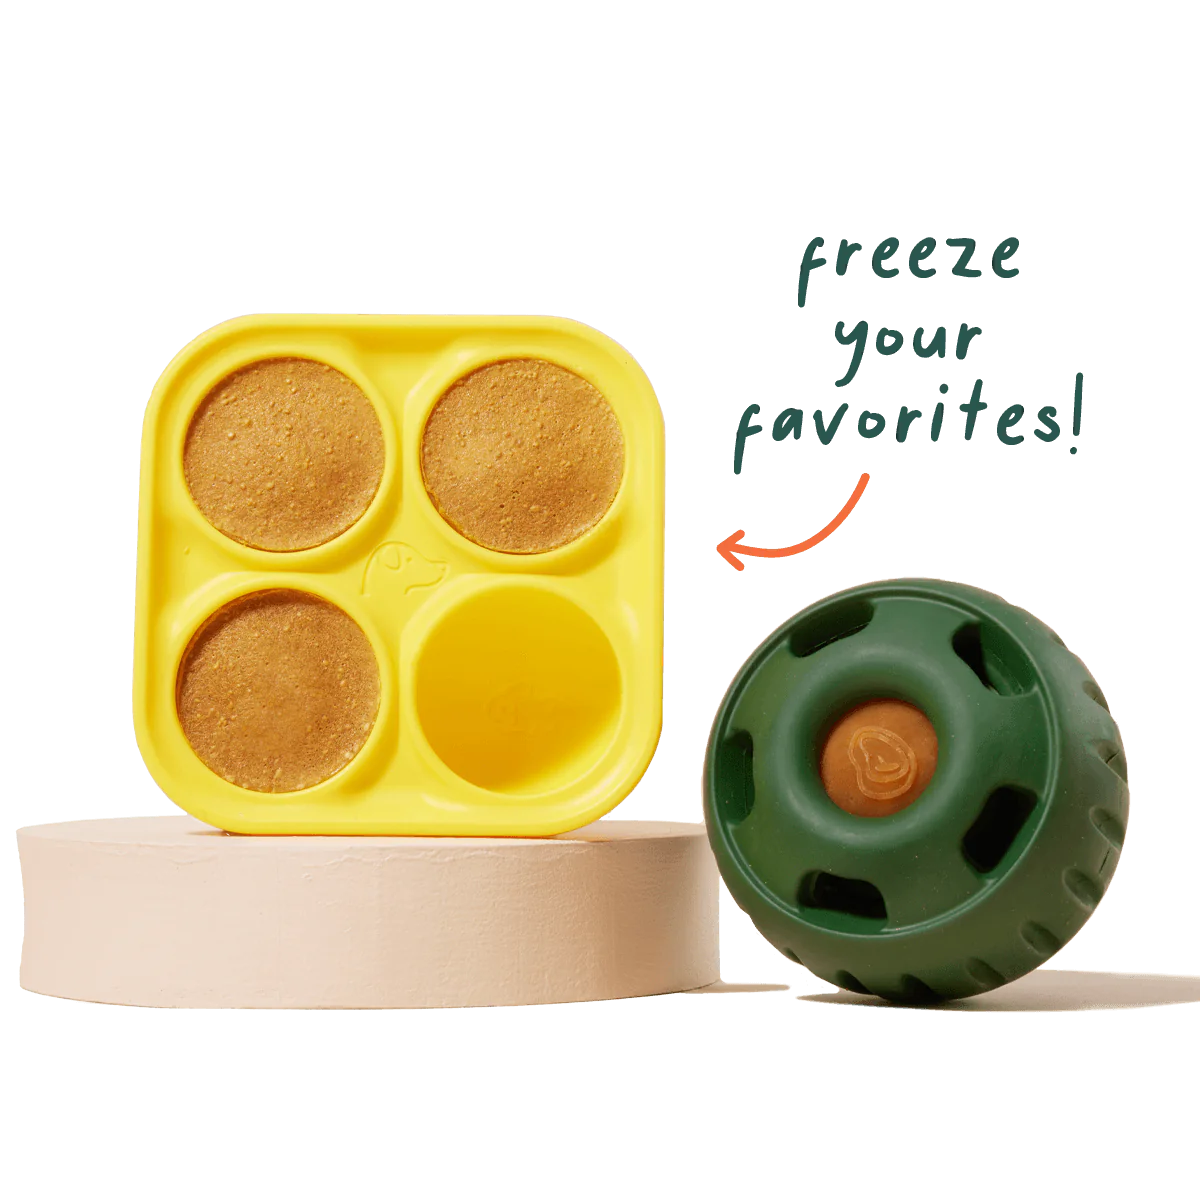 Woof Pupsicle and Treat Tray - Long-Lasting Fillable Treat Toy and Silicone Molds for Dog Treats - Reusable, Dishwasher Safe - for XL Dogs 75 lbs